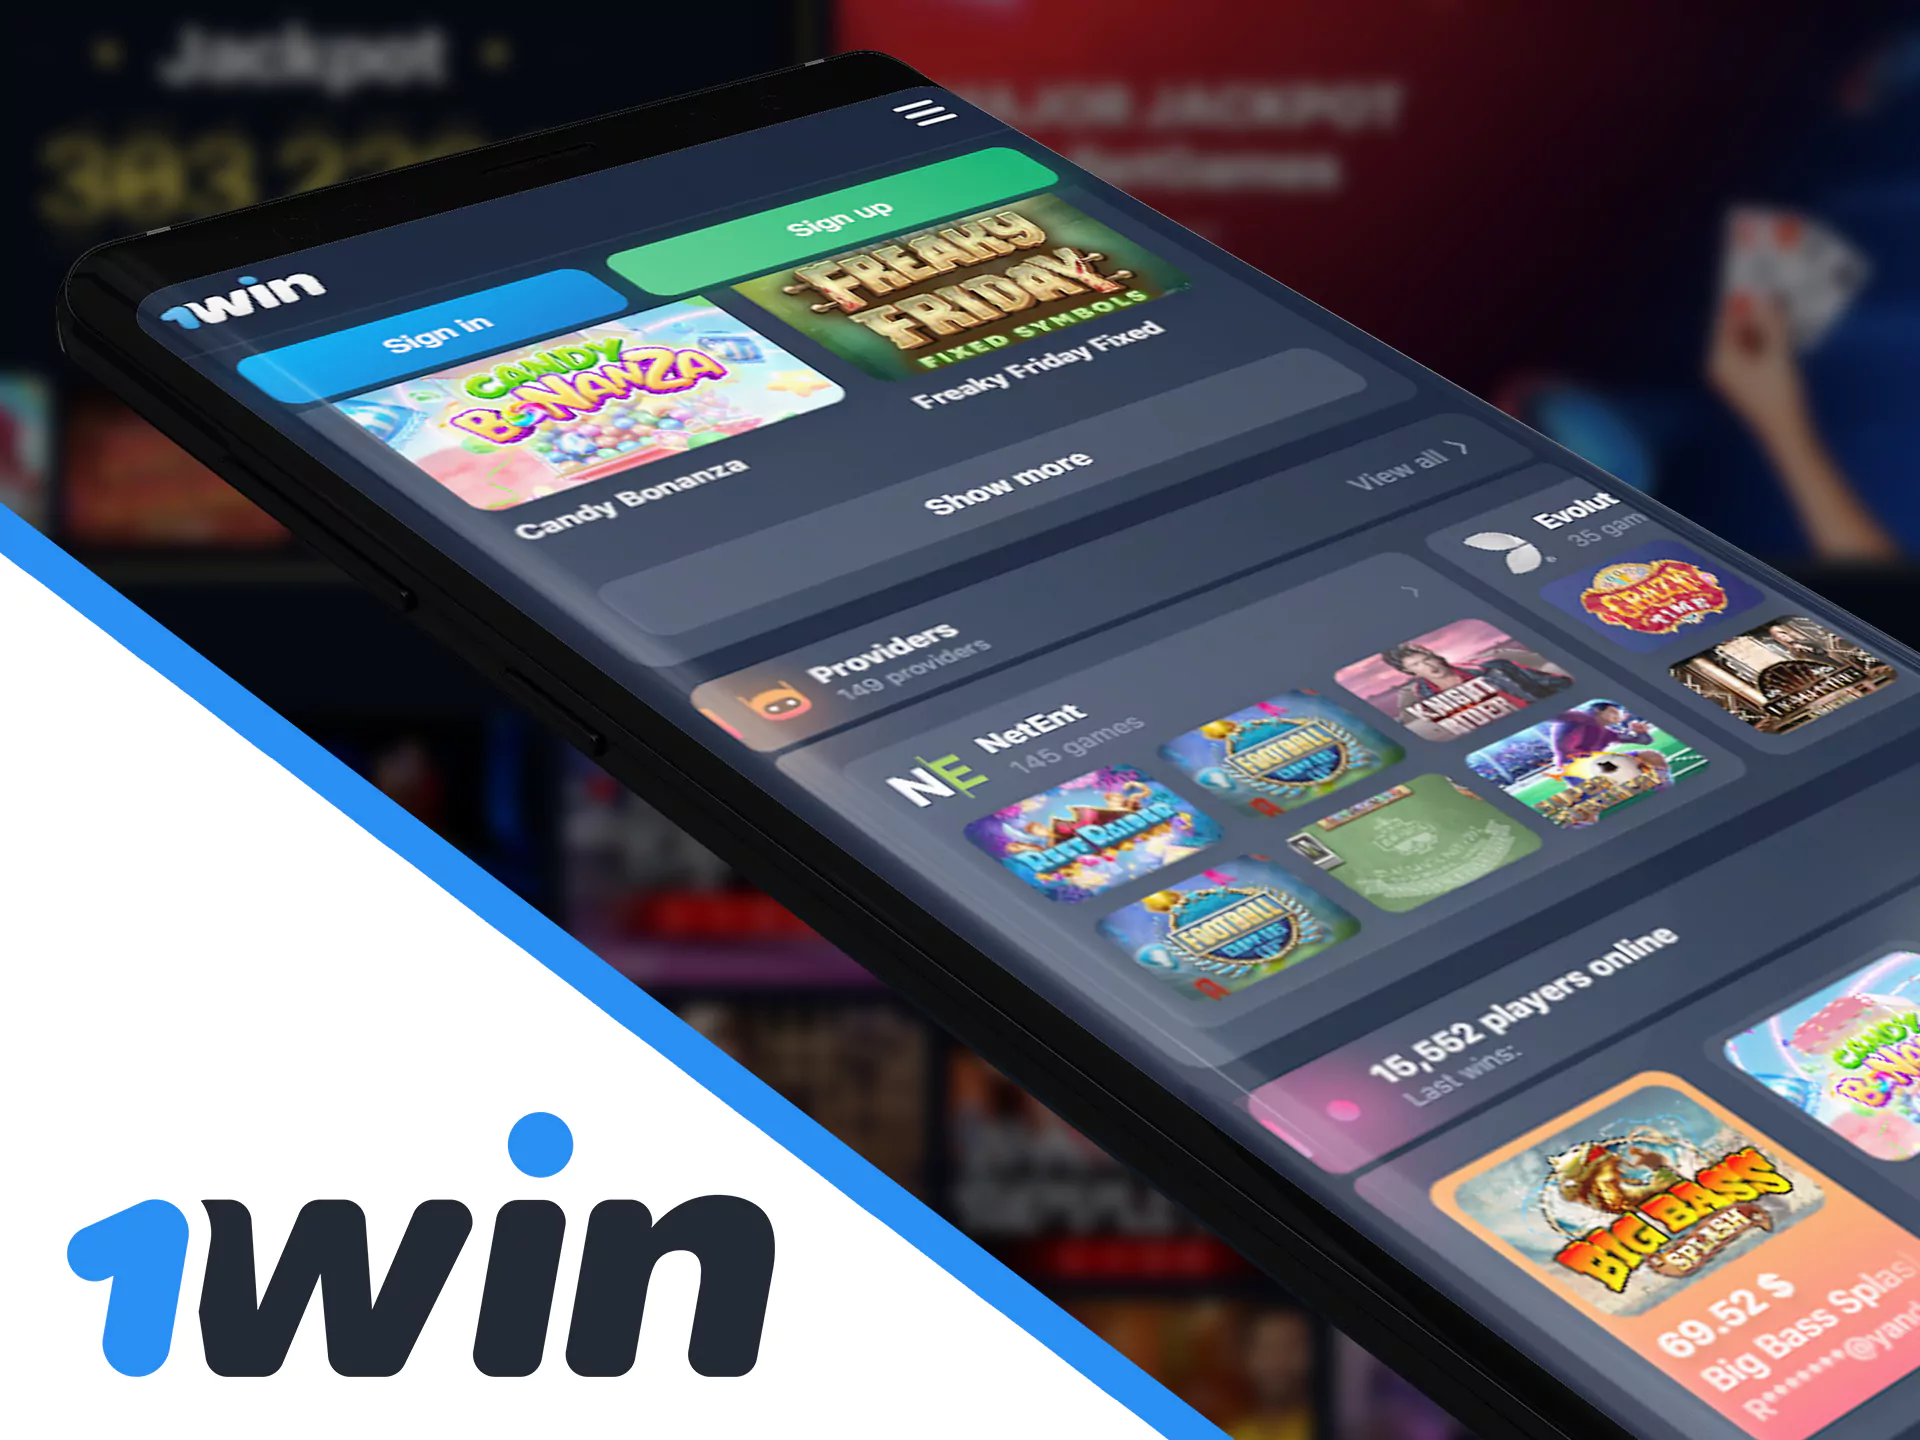 Check for your favourite casino games at 1win app.